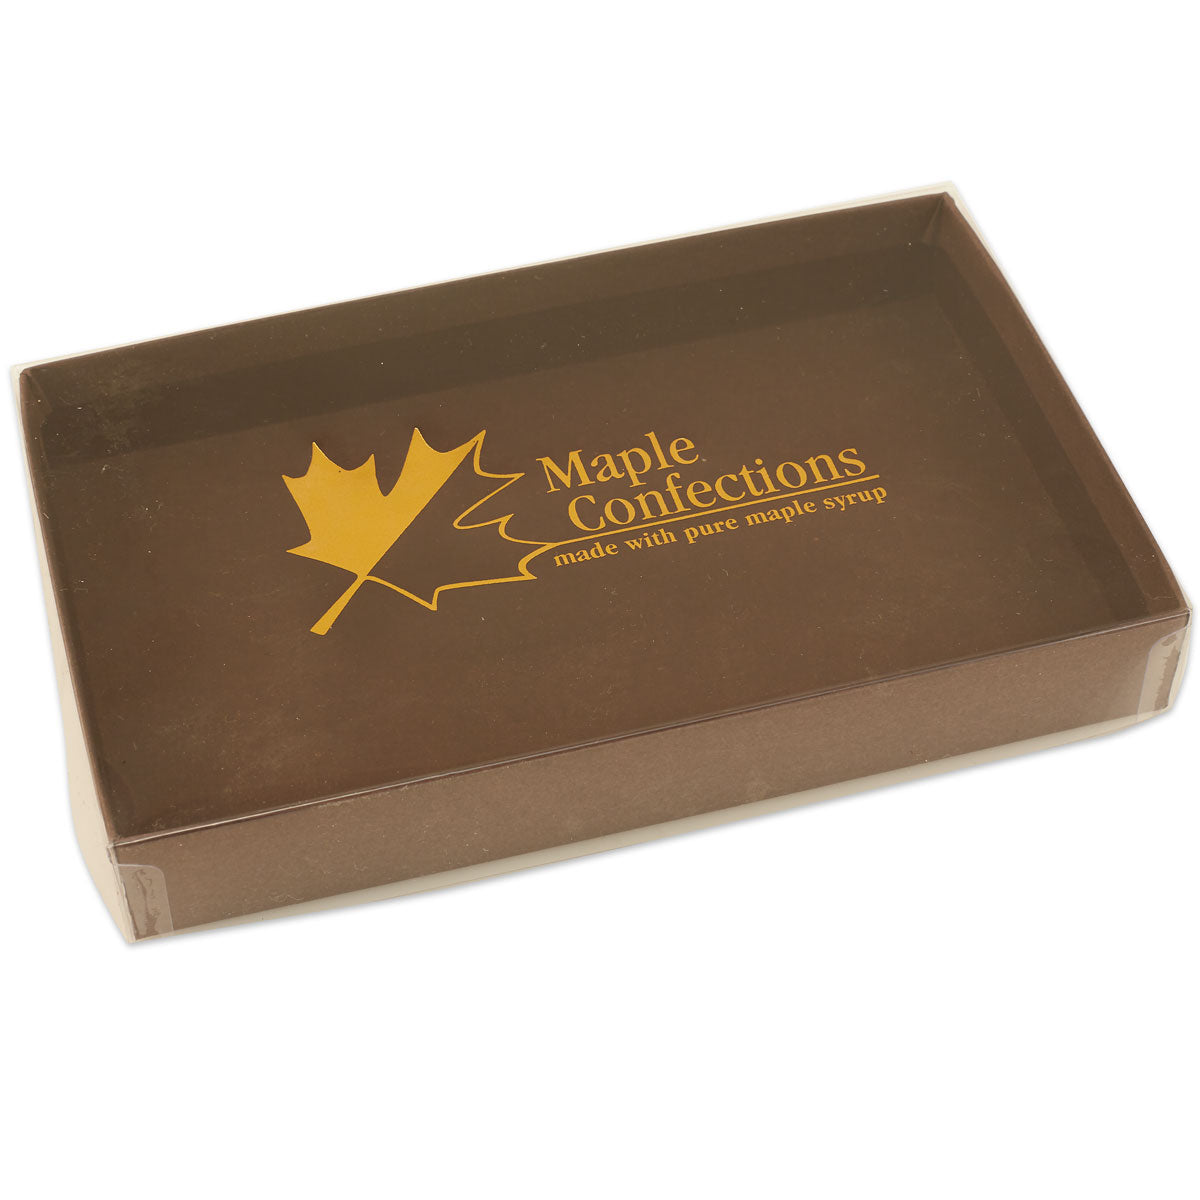 Maple Confections Candy Box w/Clear Cover  (1"x4 5/8"x7 3/8") Holds1/2 lb